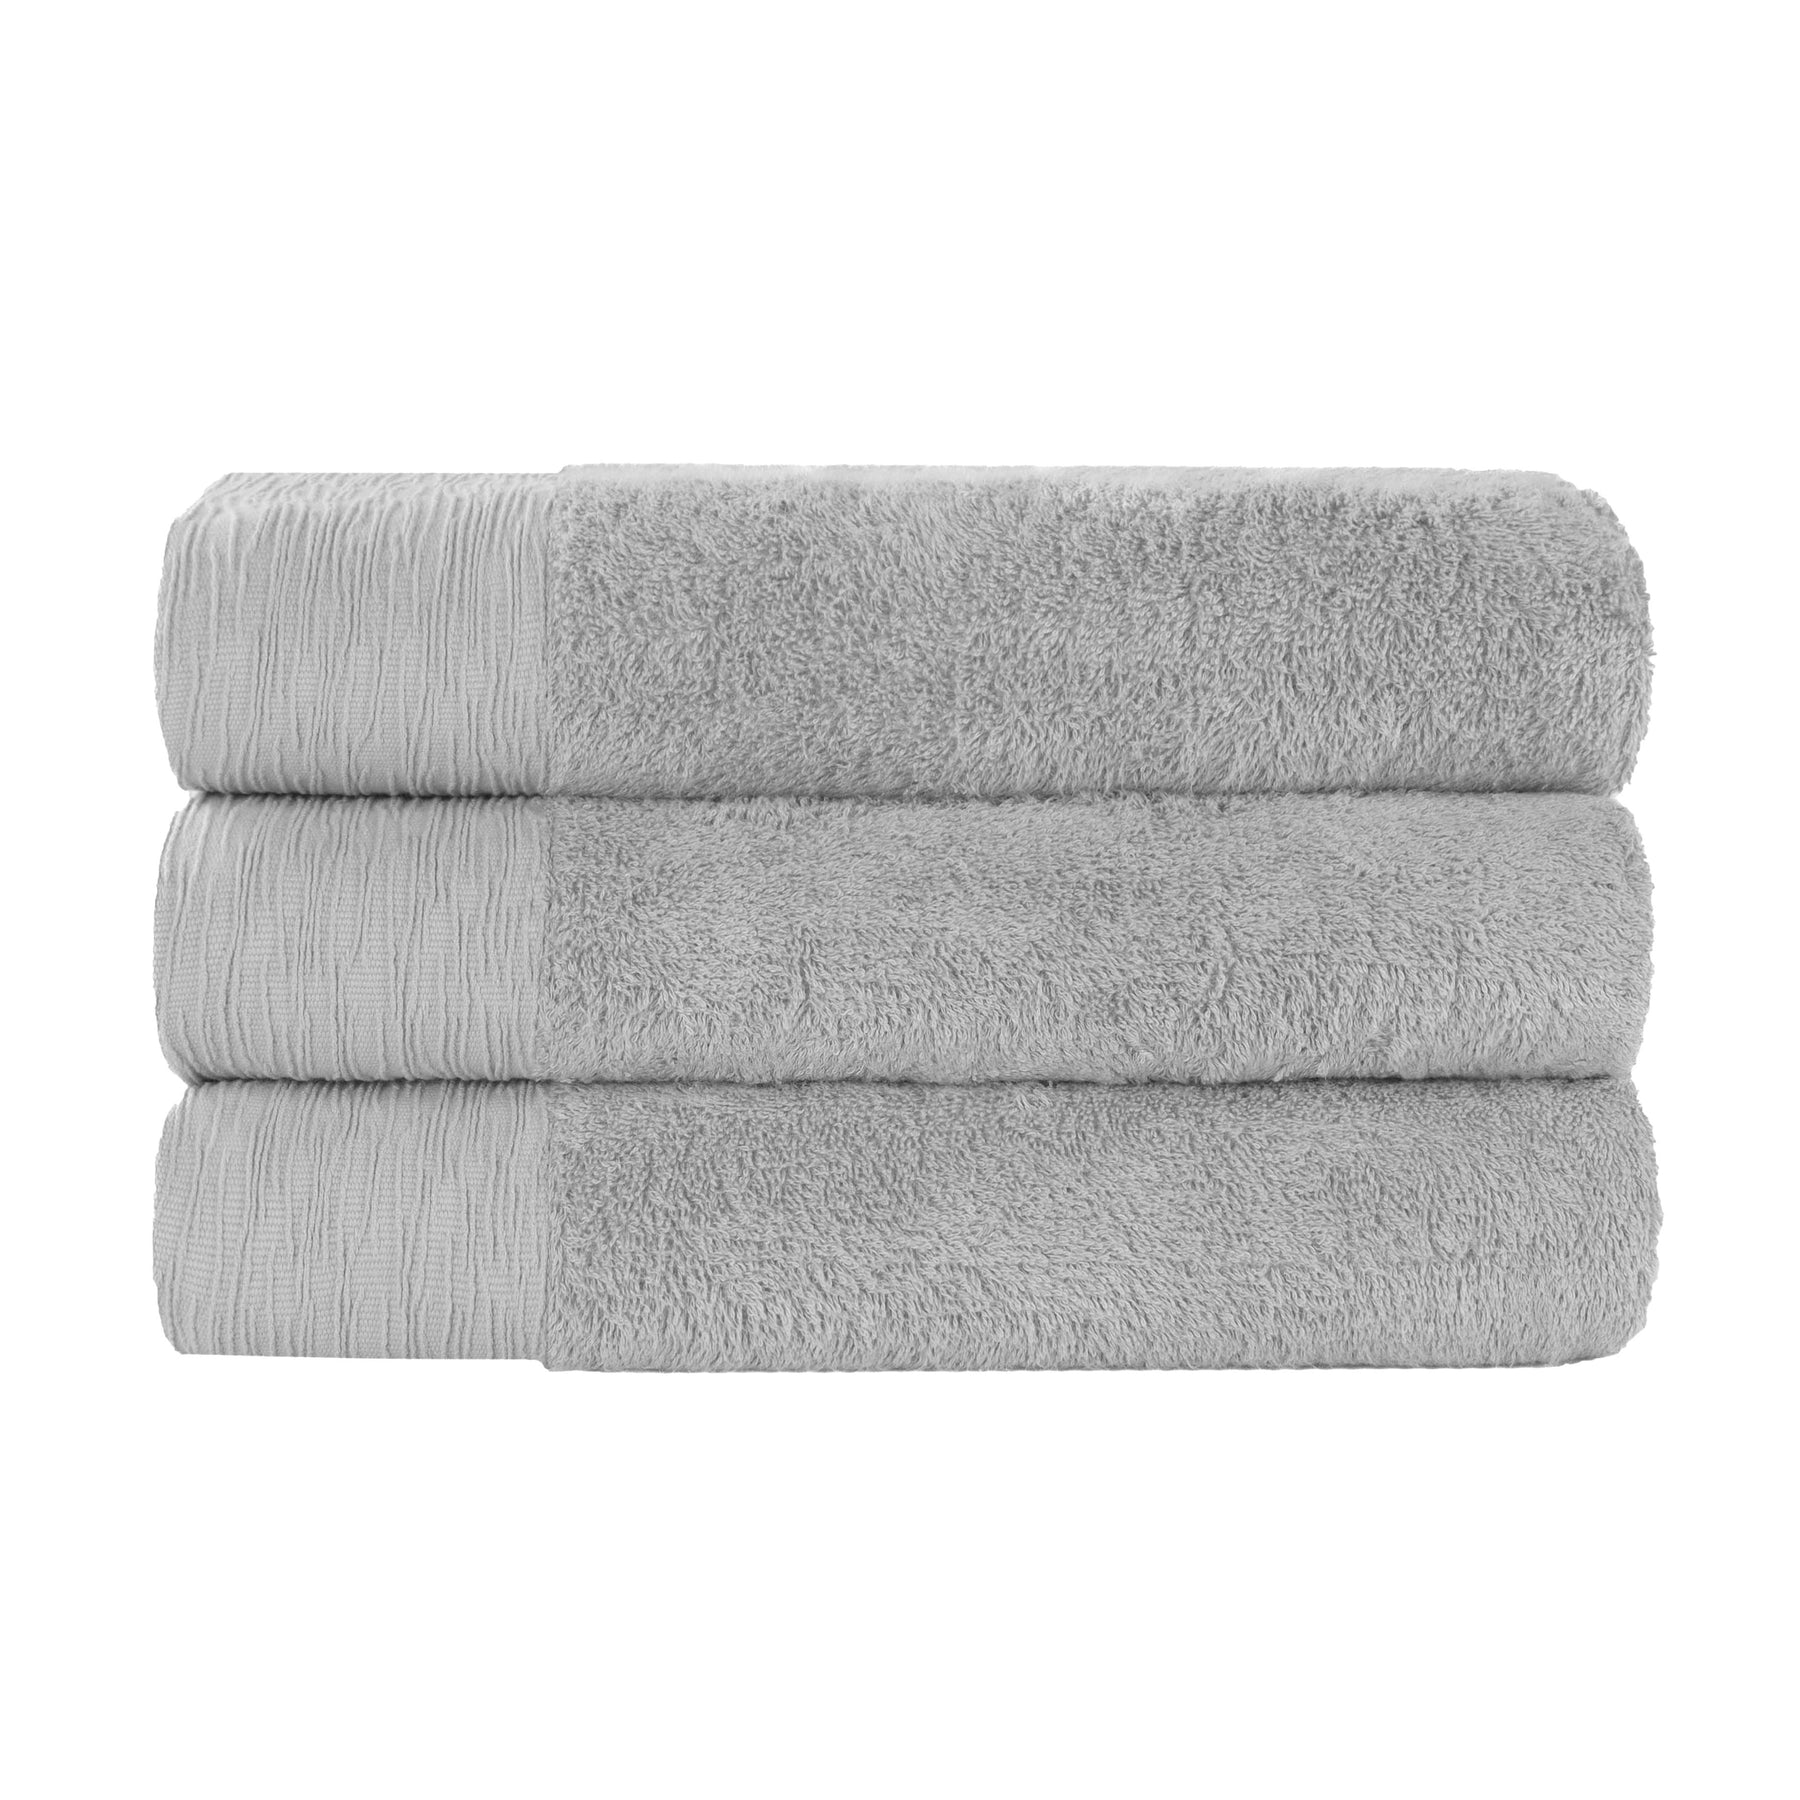 Rayon from Bamboo Eco-Friendly Fluffy Soft Solid Bath Towel Set of 3 - Bath Towel by Superior - Superior 